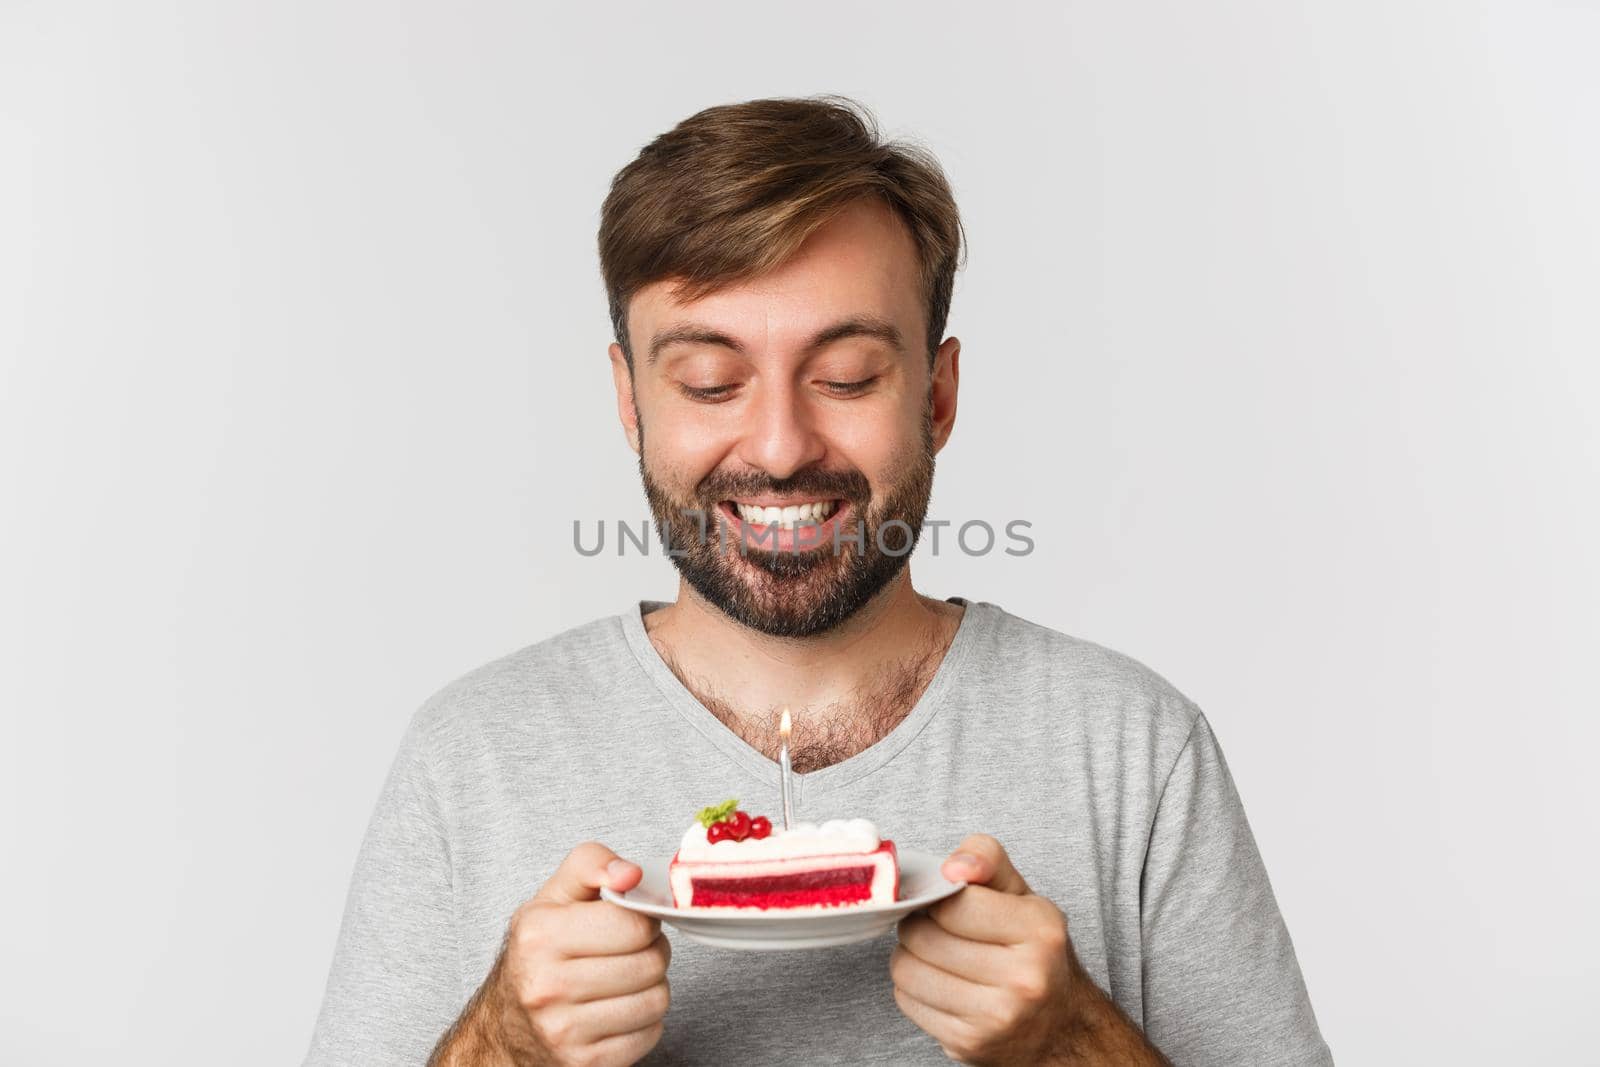 Close-up of happy bearded man, smiling and celebrating birthday, holding cake with lit candle, making b-day wish, standing over white background.